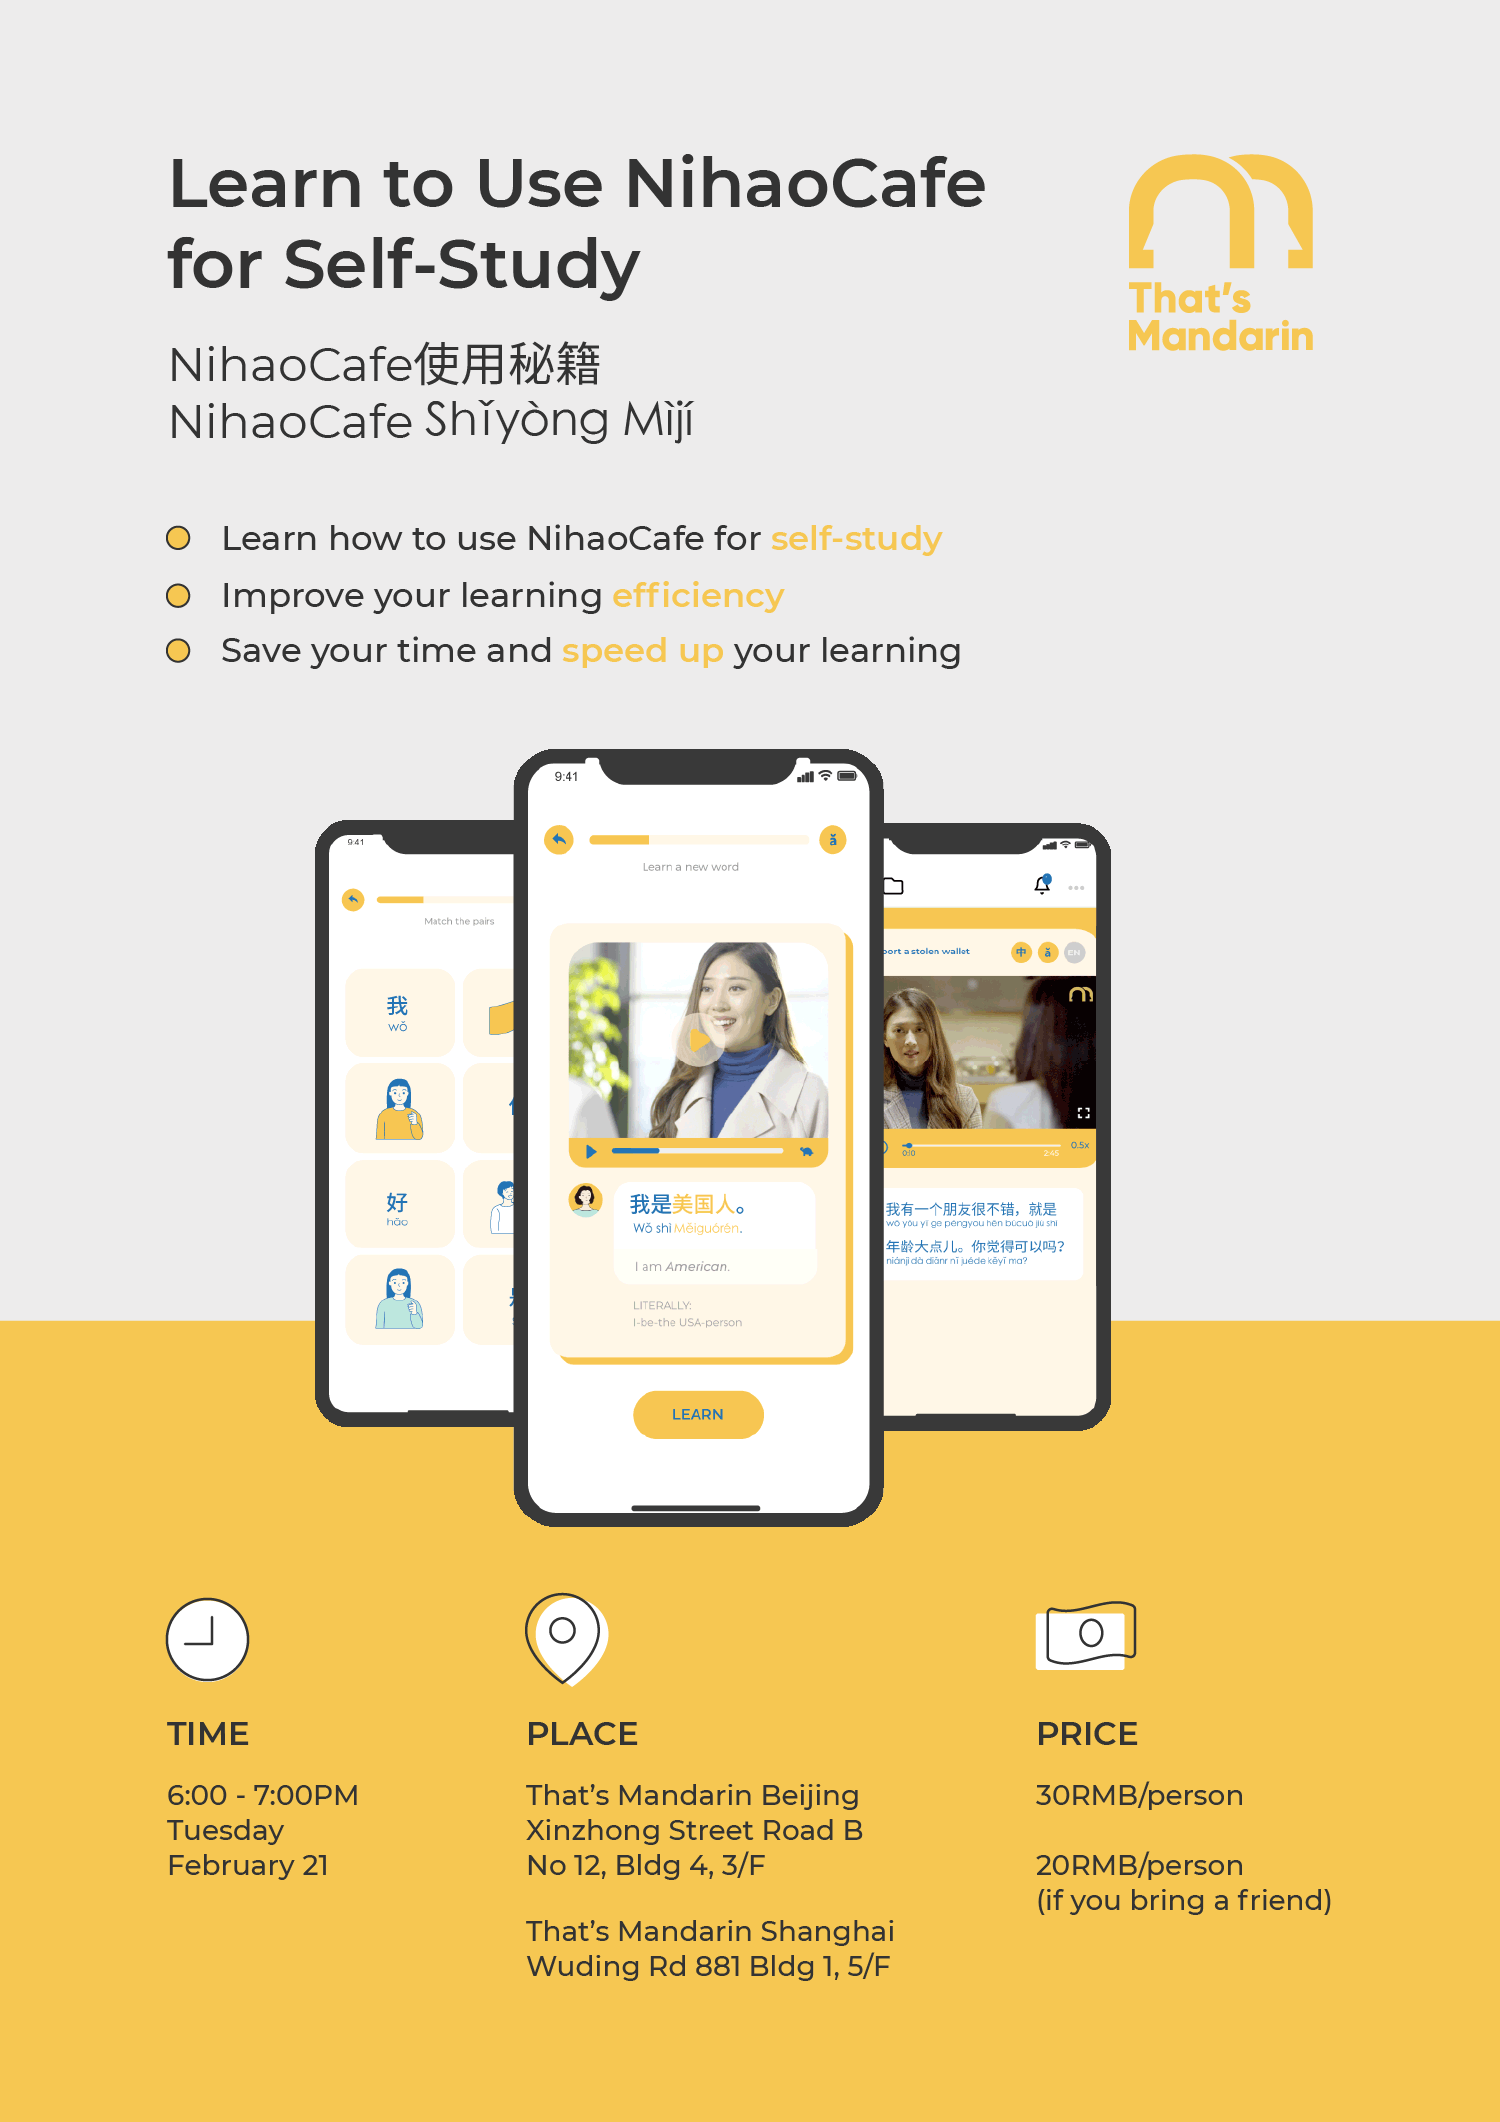 Feb 21, 2023: Learn to Use NihaoCafe for Self-Study | That's Mandarin Workshop 2023